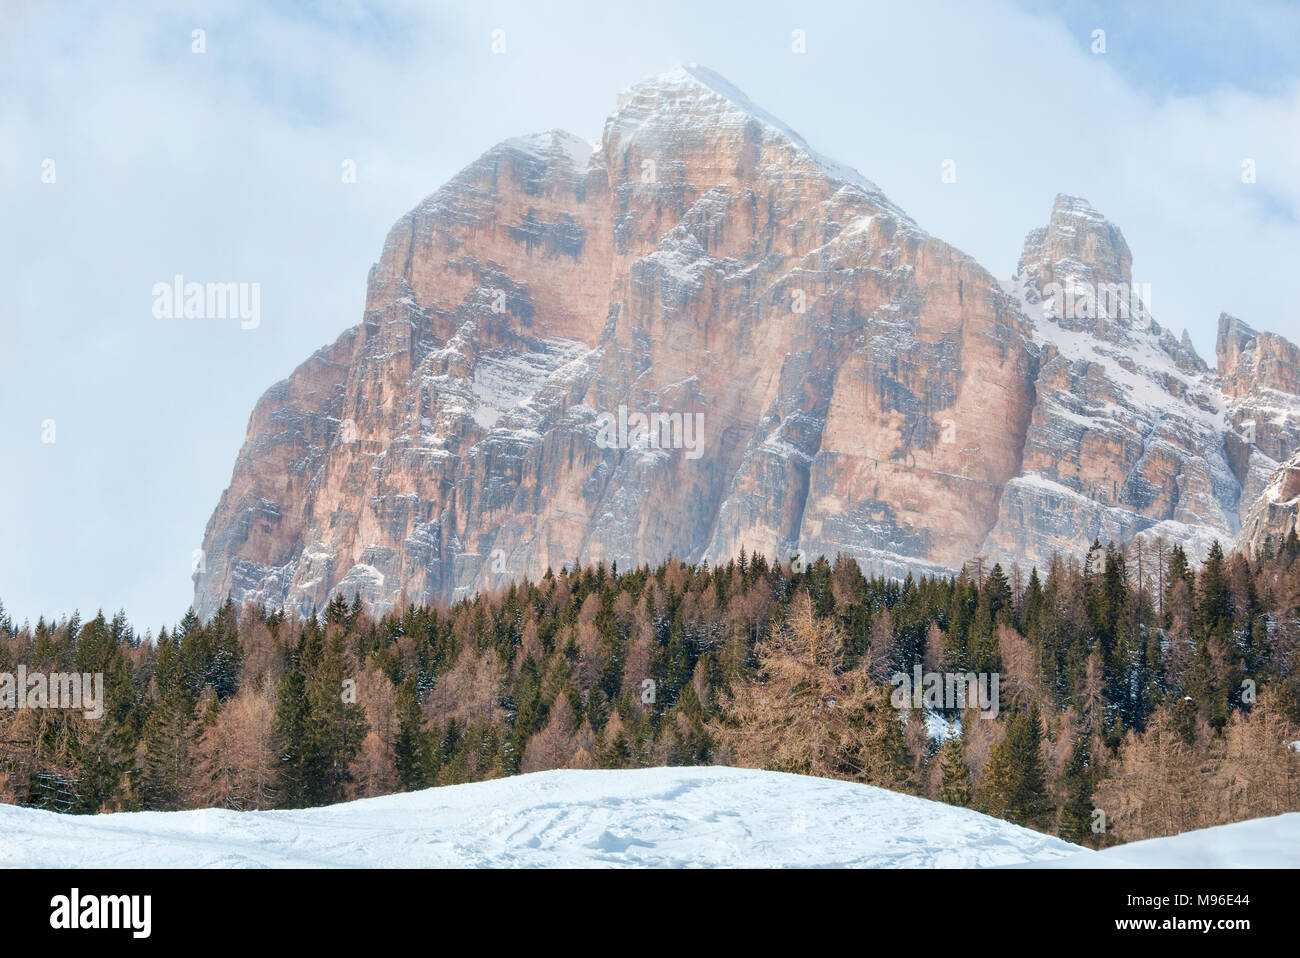 Spectacular view in the mountains. The Dolomites are one of Europe’s most complete and varied climbing destination. Stock Photo